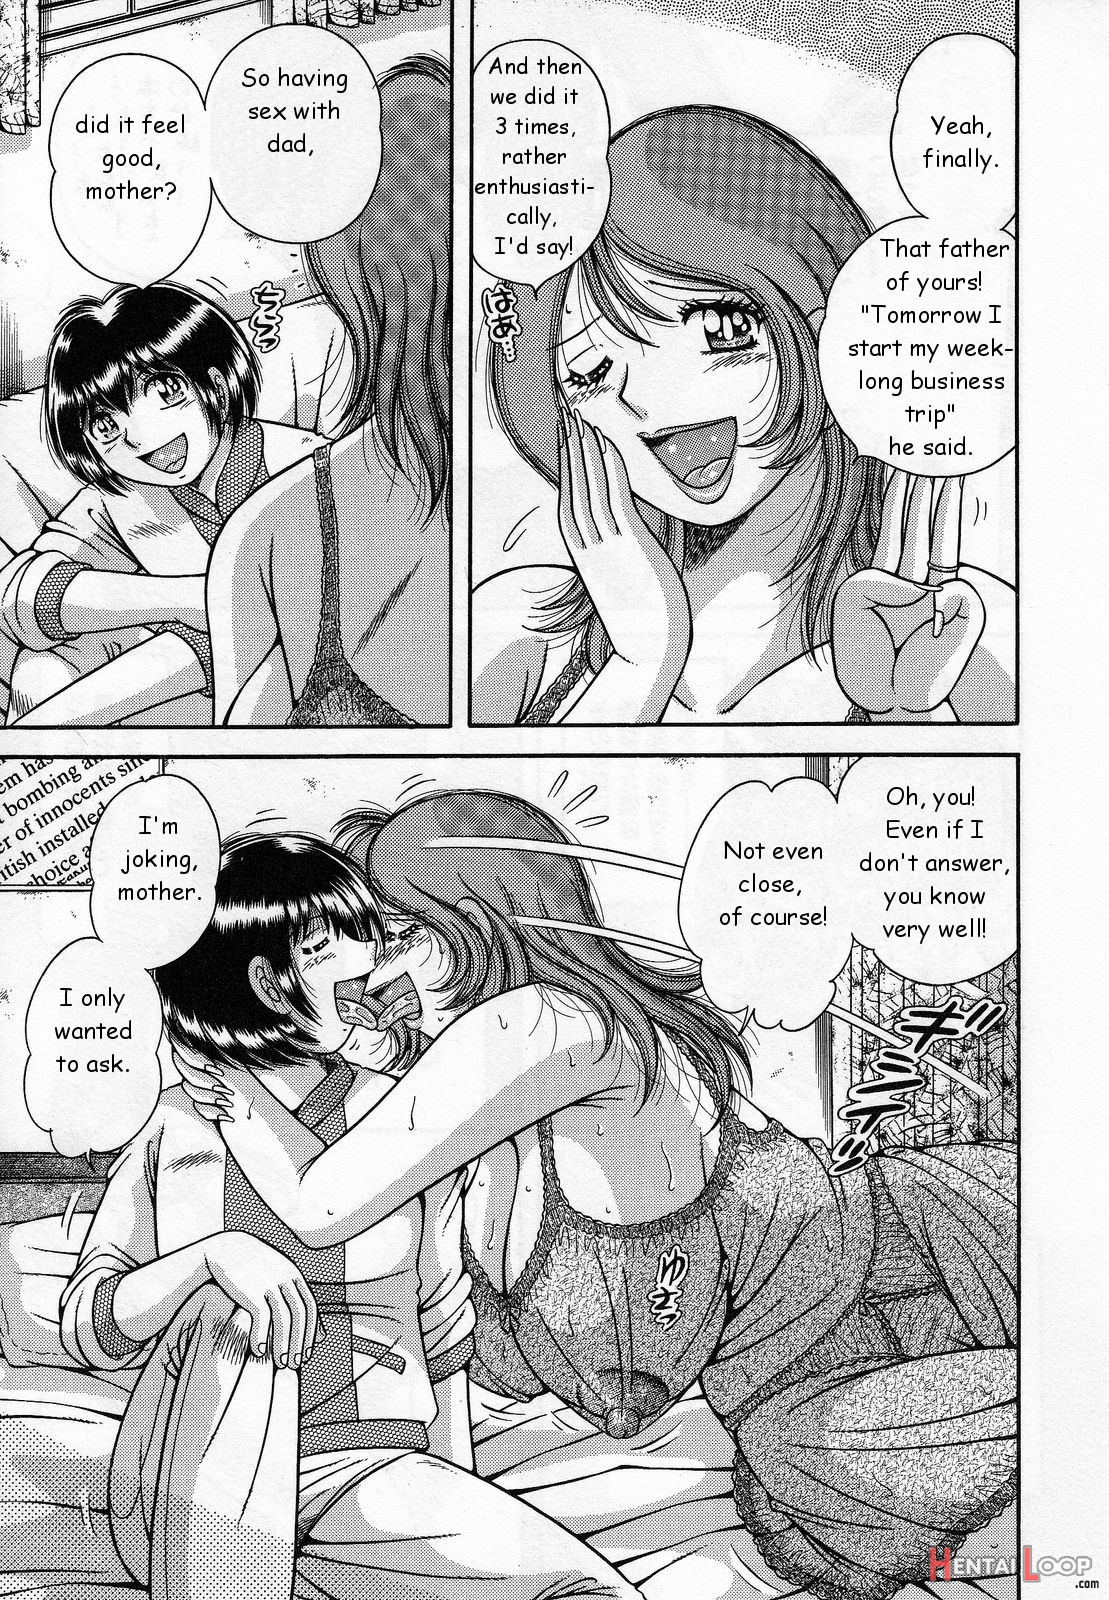 Sweet Relations page 3